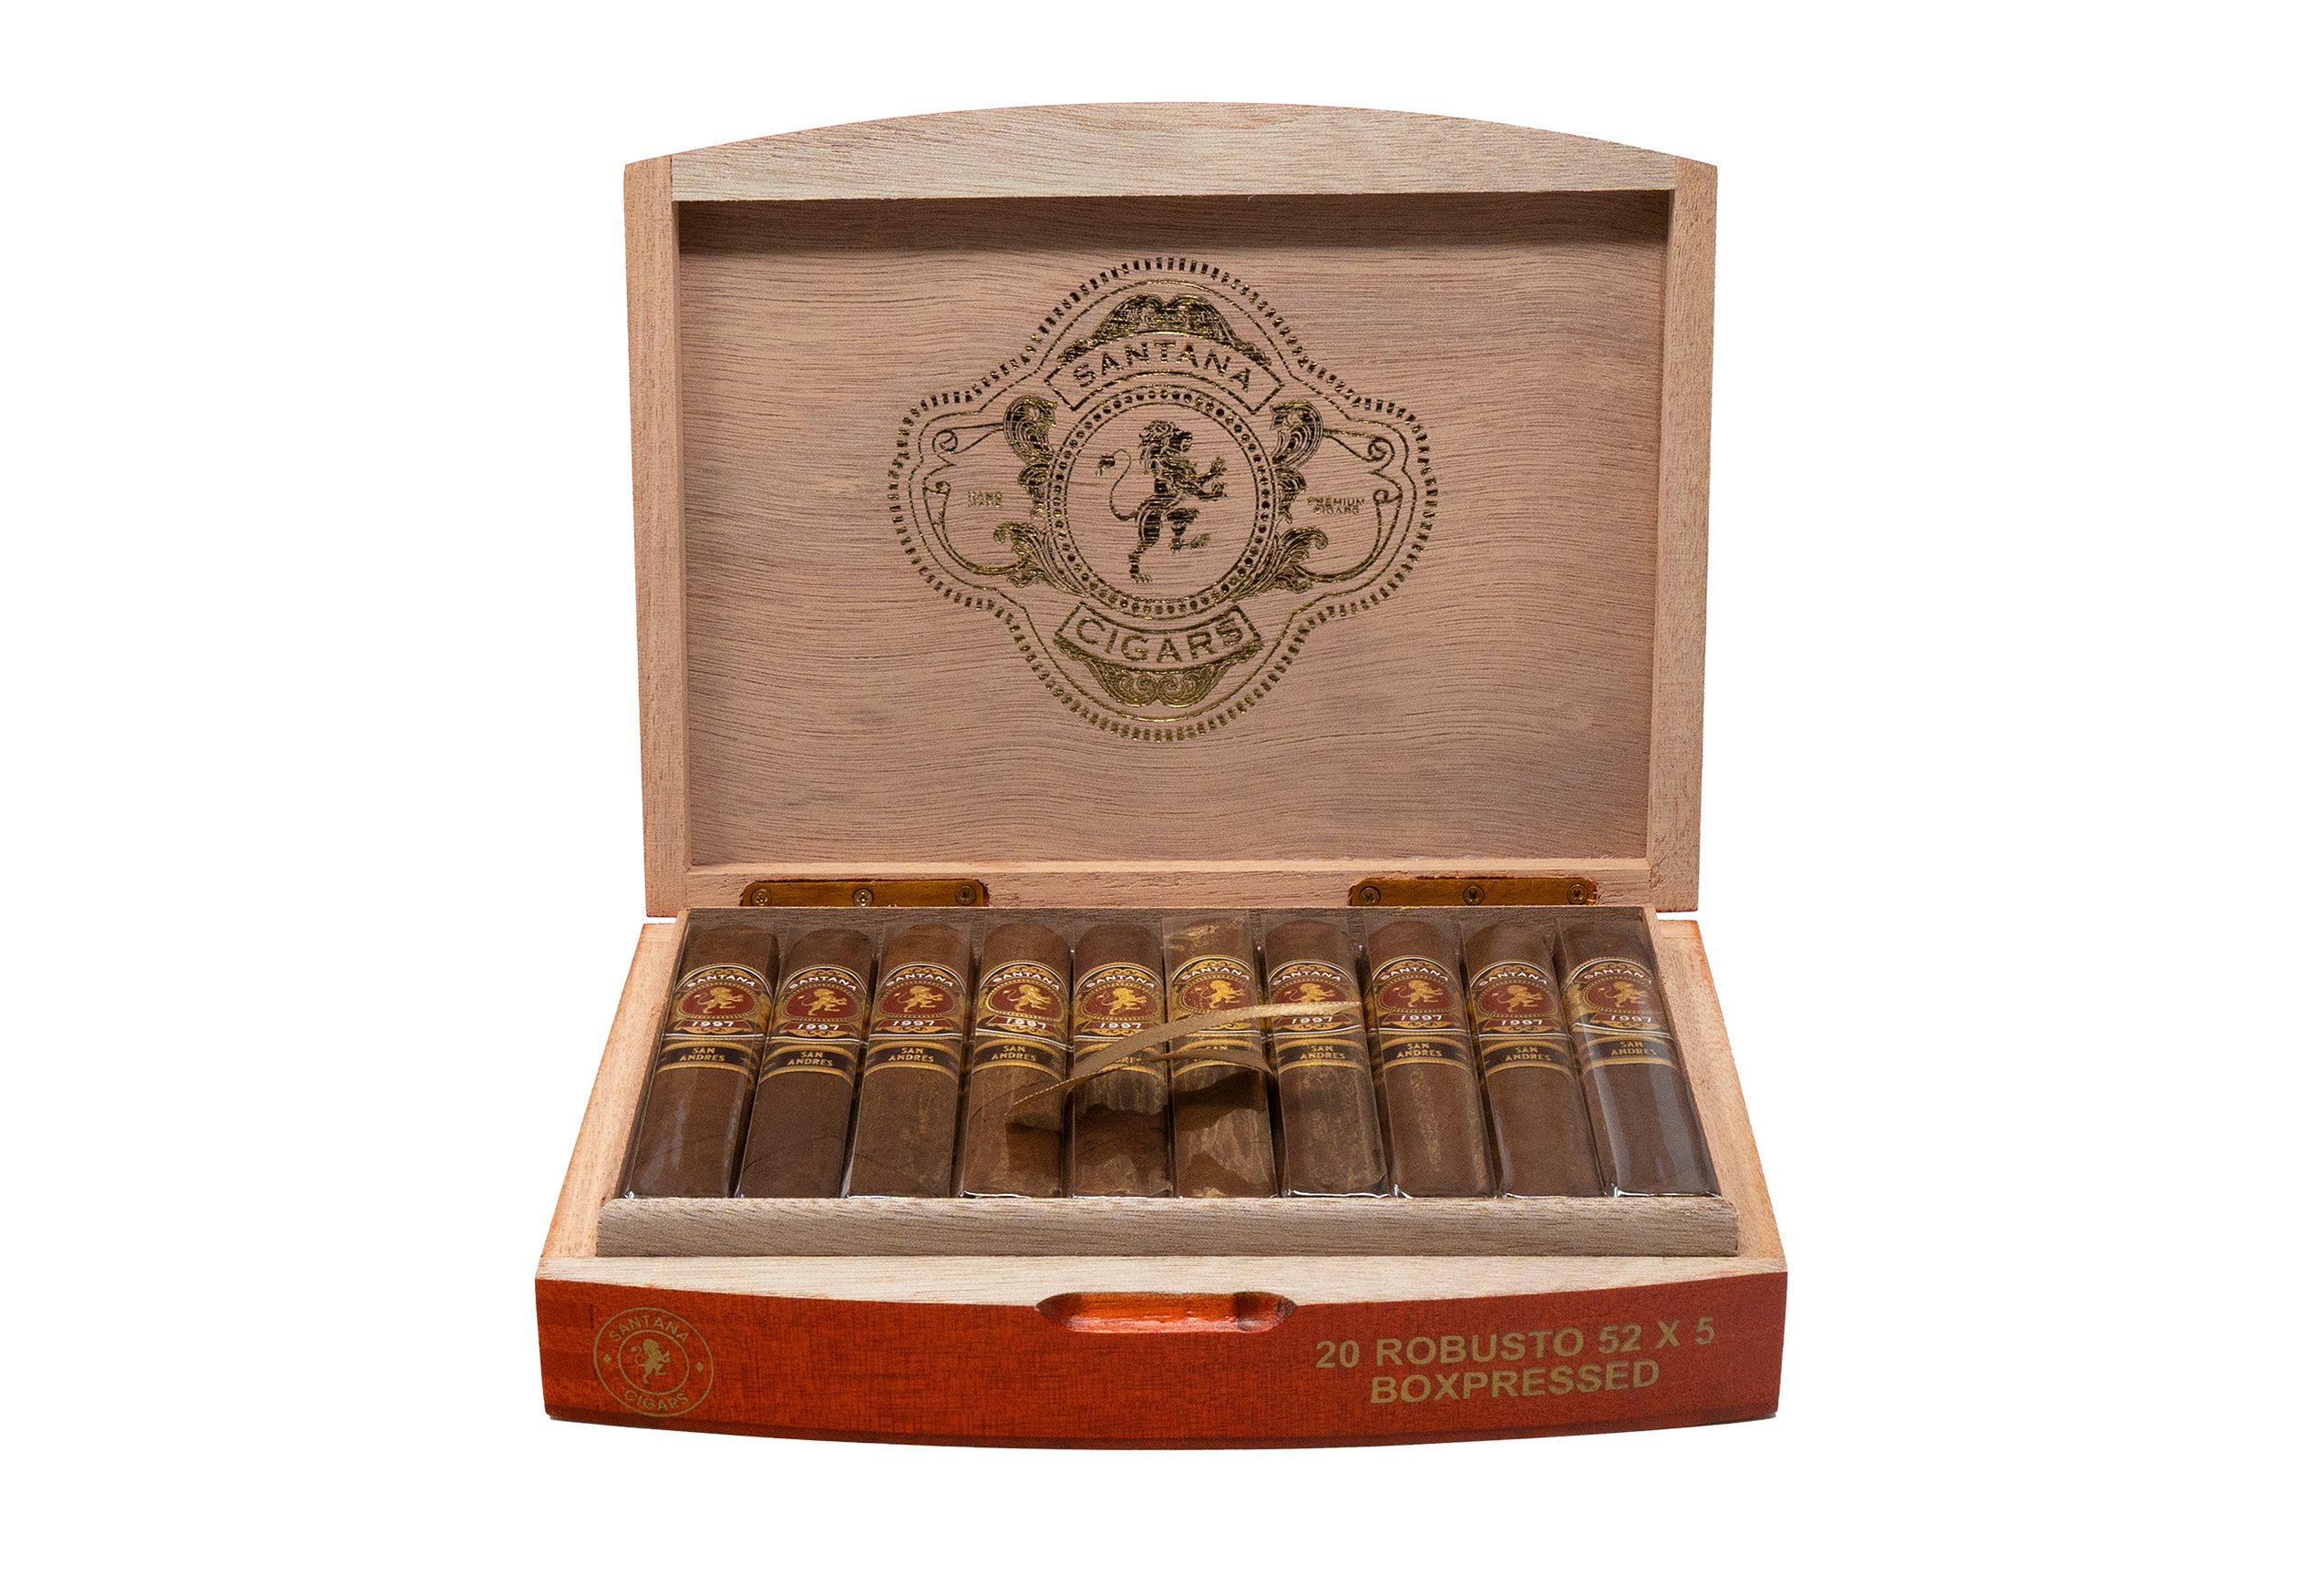 santana-cigars-co.-debuts-with-san-andres-wrapped-line